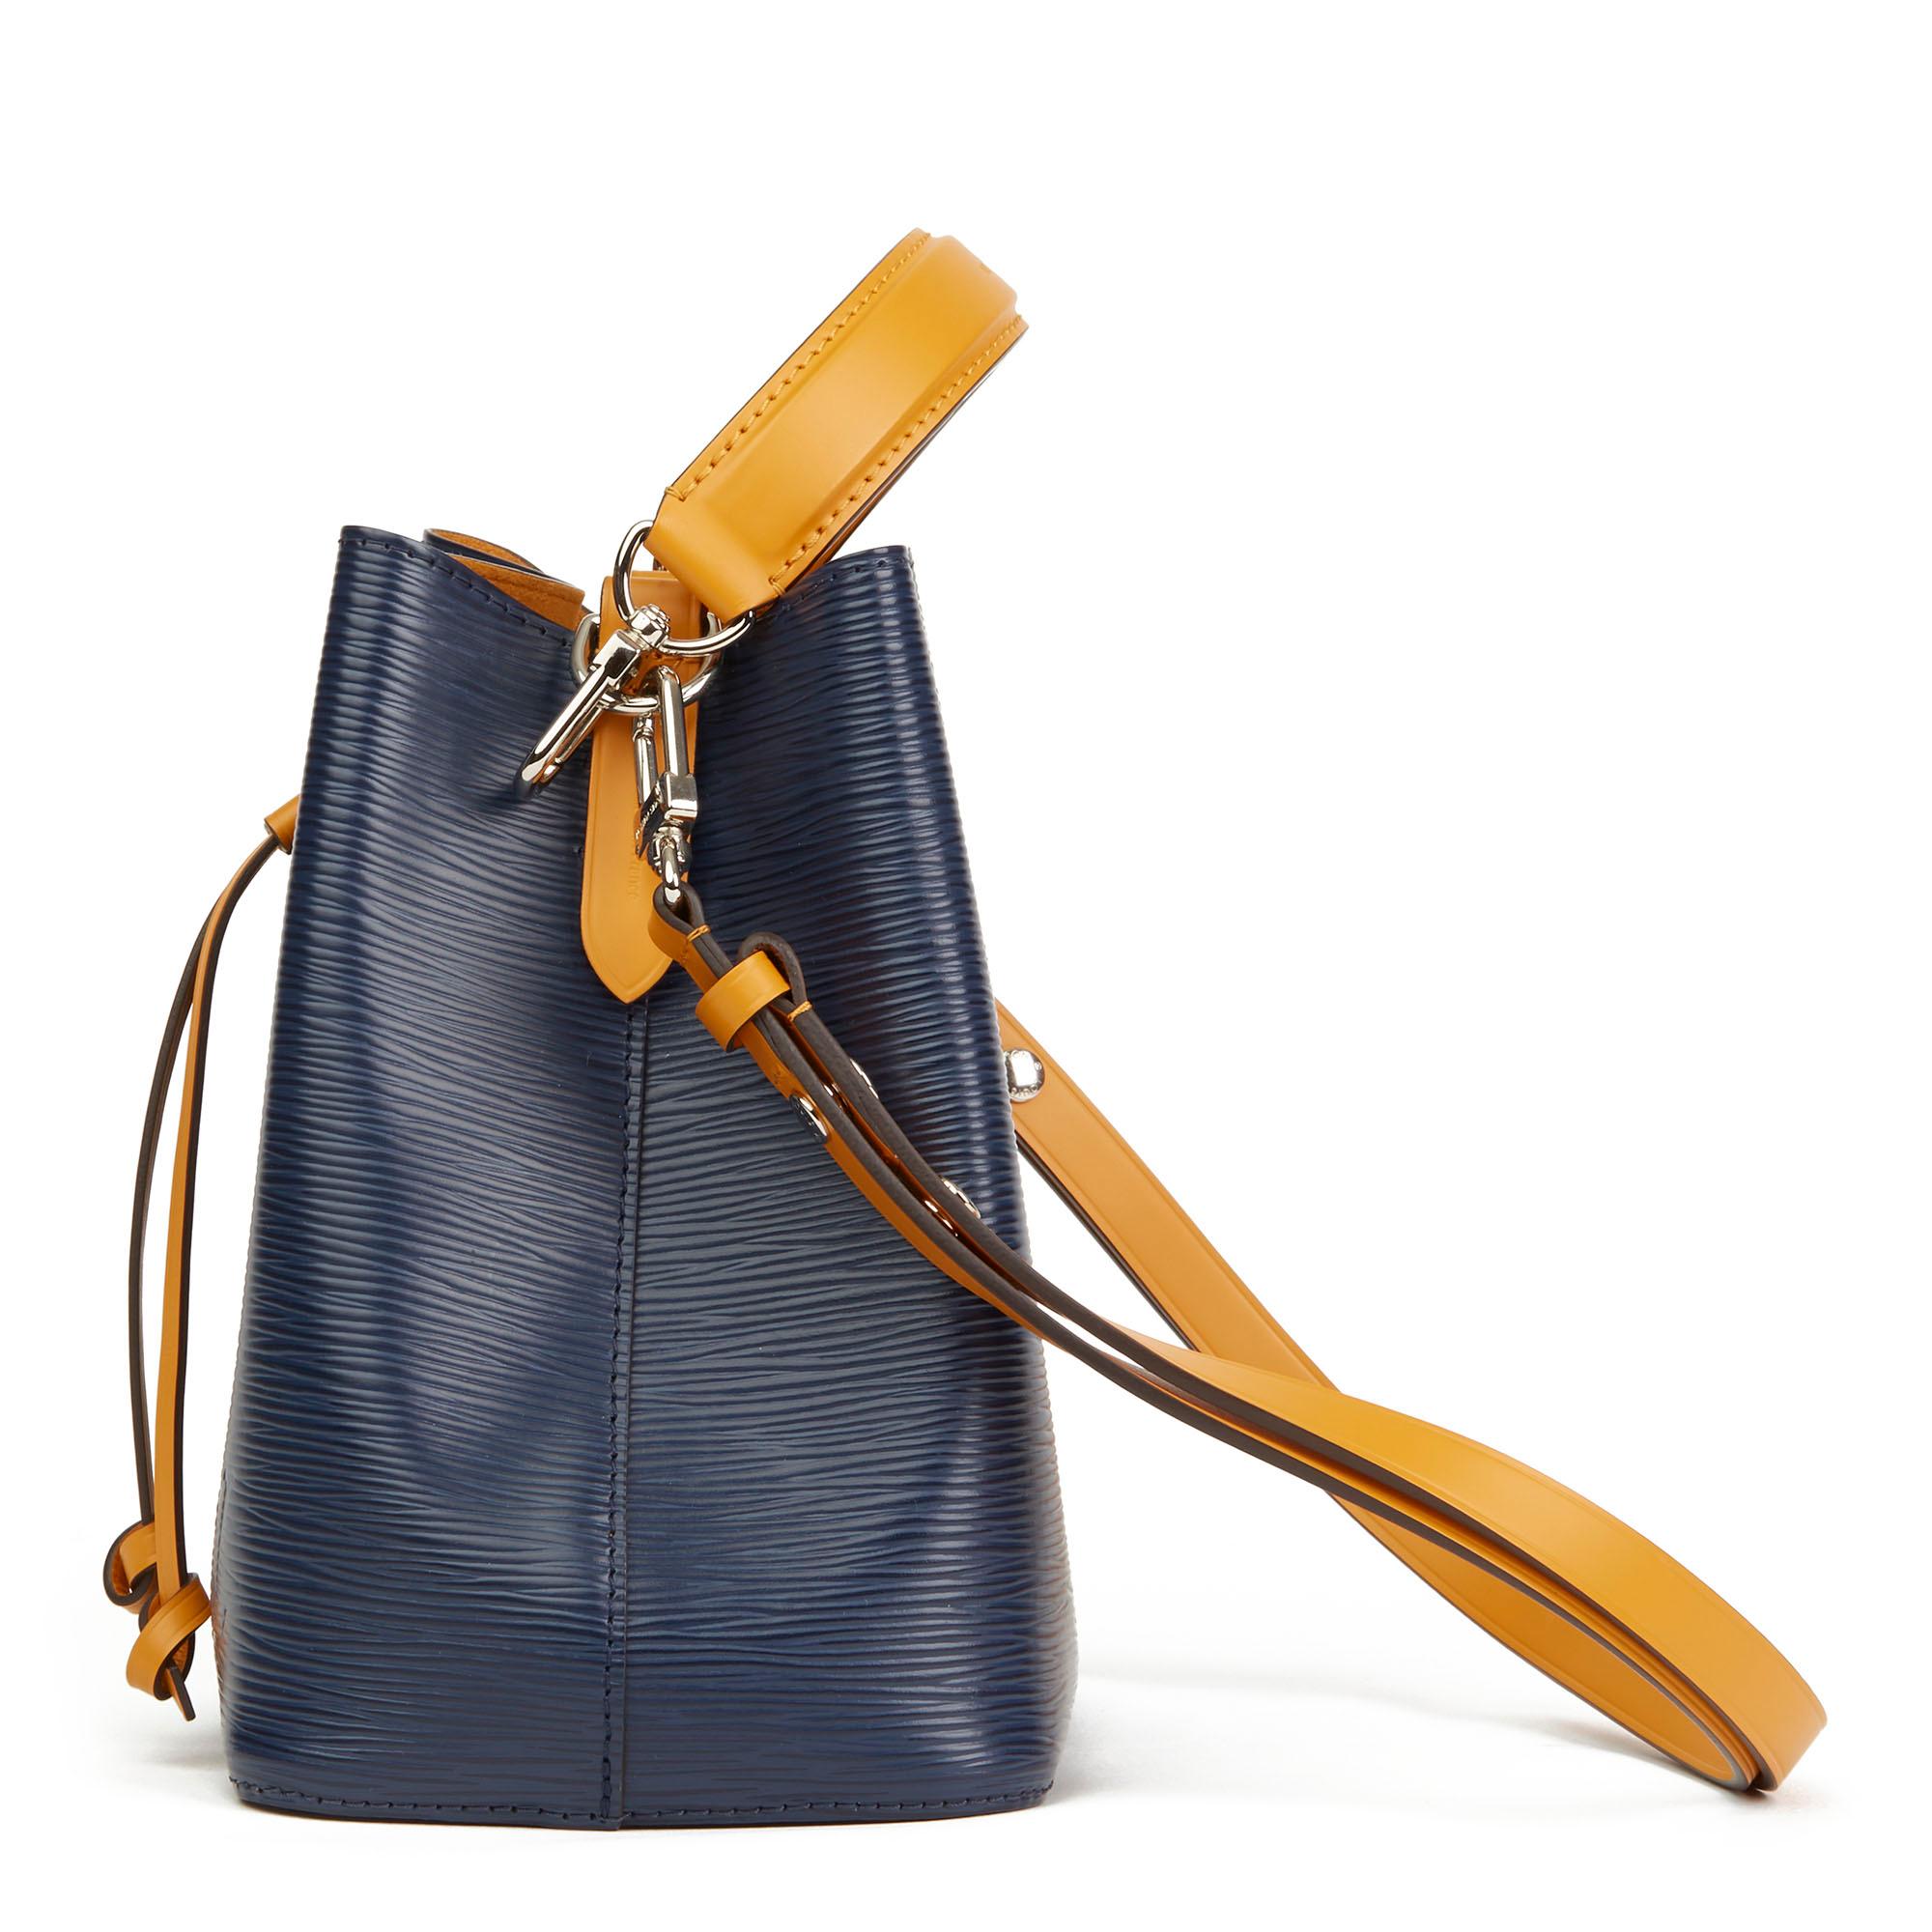 LOUIS VUITTON
Indigo & Safran Epi Leather NéoNoé BB

Xupes Reference: HB2903
Serial Number: SR0179
Age (Circa): 2019
Accompanied By: Louis Vuitton Dust Bag
Authenticity Details: Date Stamp (Made In France)
Gender: Ladies
Type: Shoulder, Top